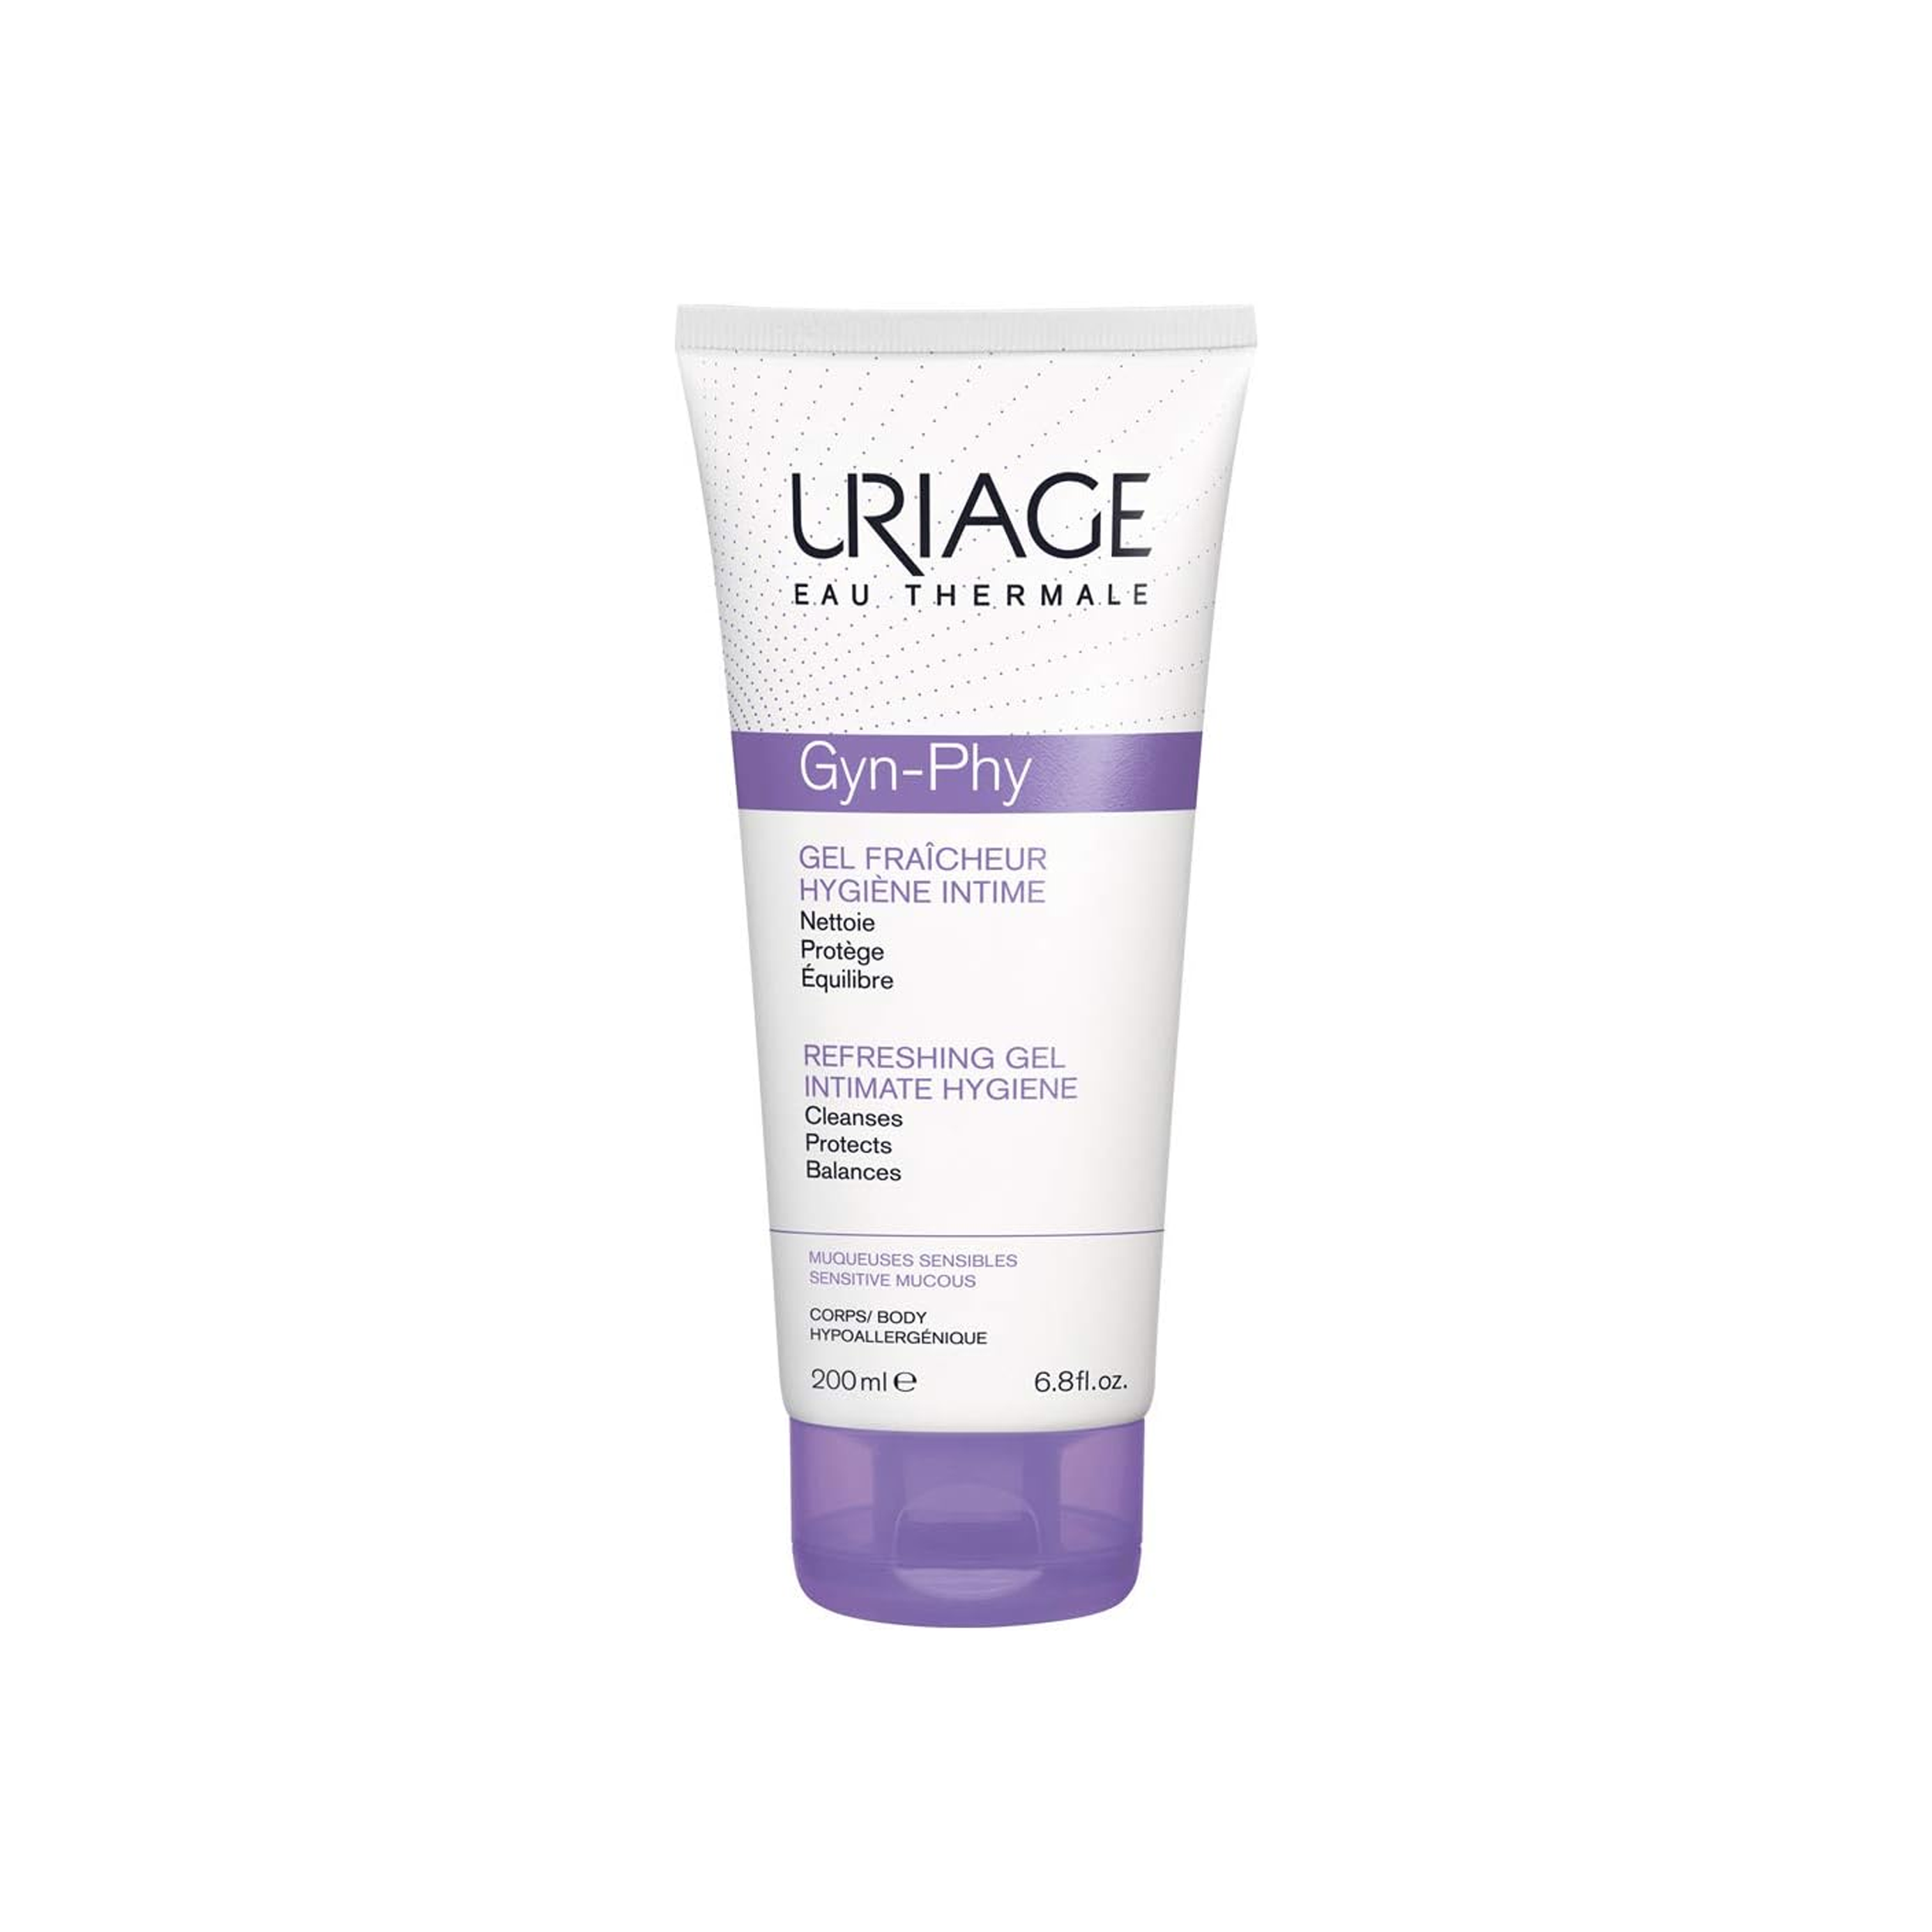 URIAGE GYN-PHY INTIMATE CLEANS GEL200ML 50% ON 2ND